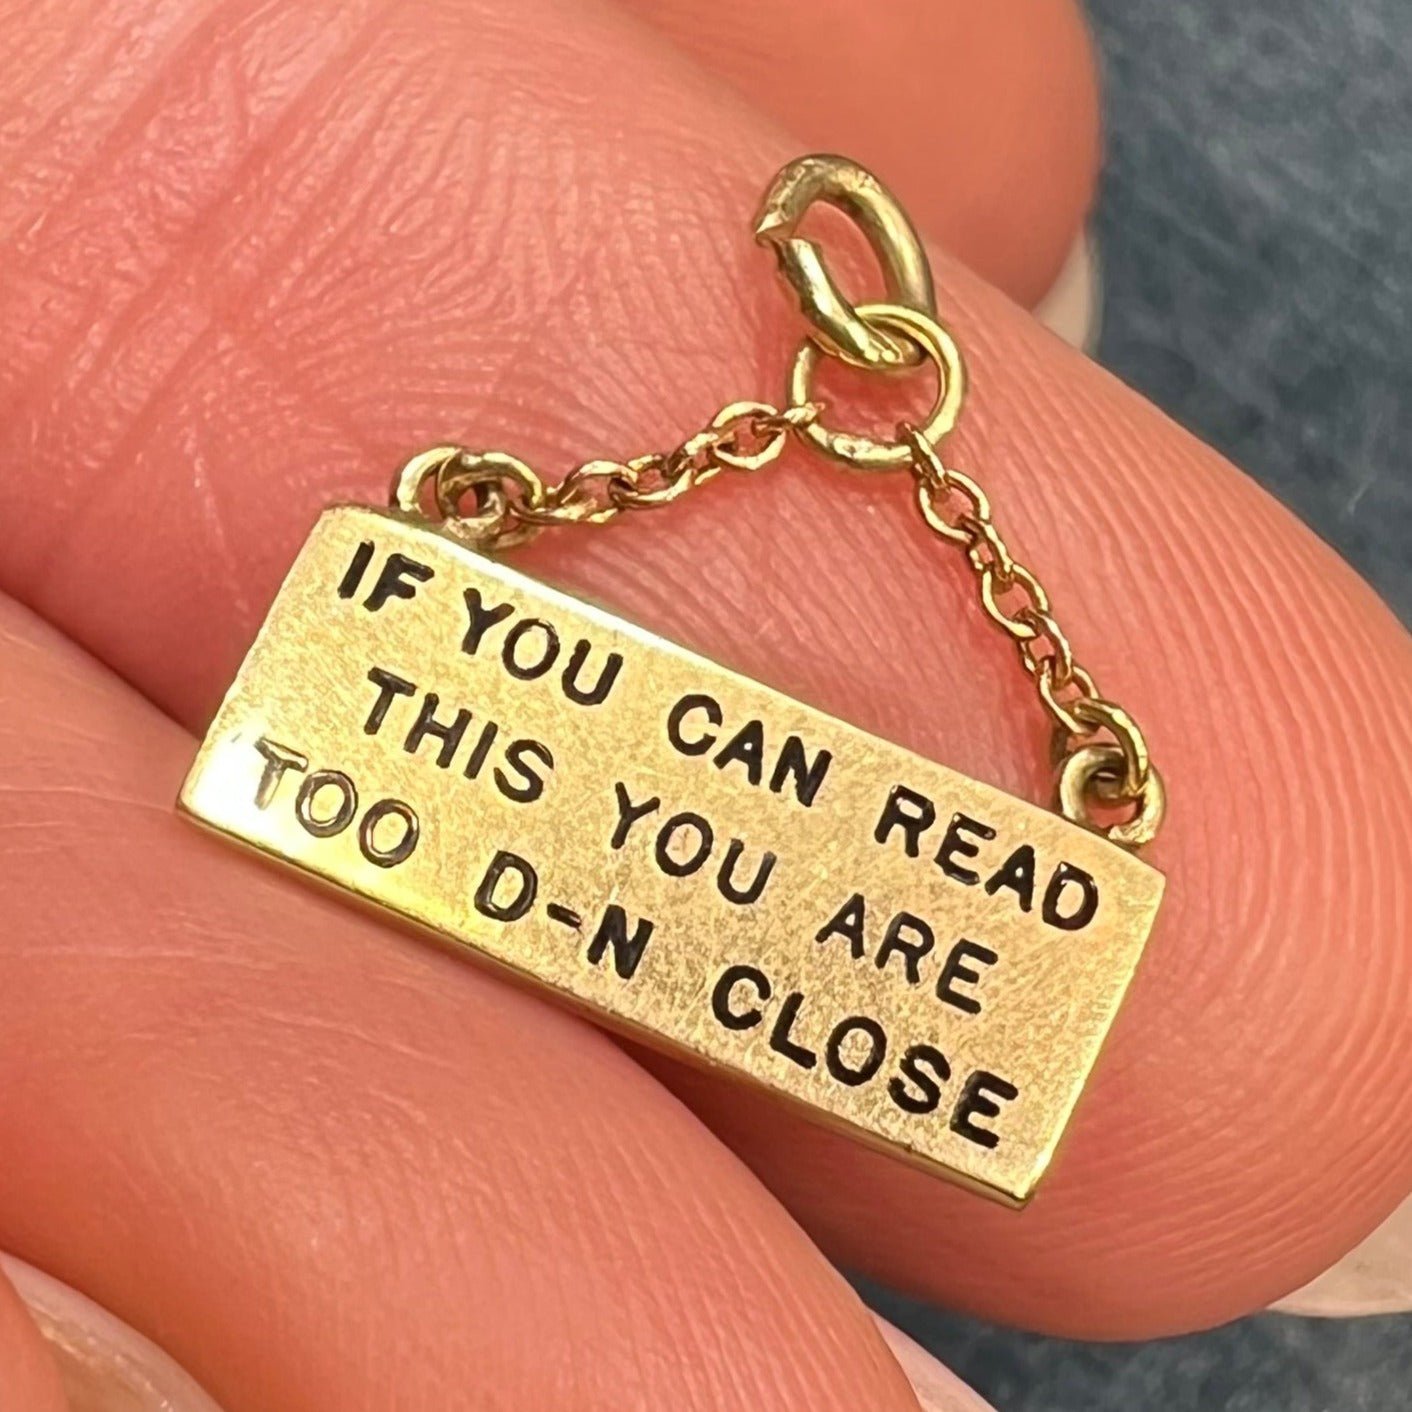 14k Gold Hanging Sign Pendant "You Are Too D-n Close". Tiny! *Video*